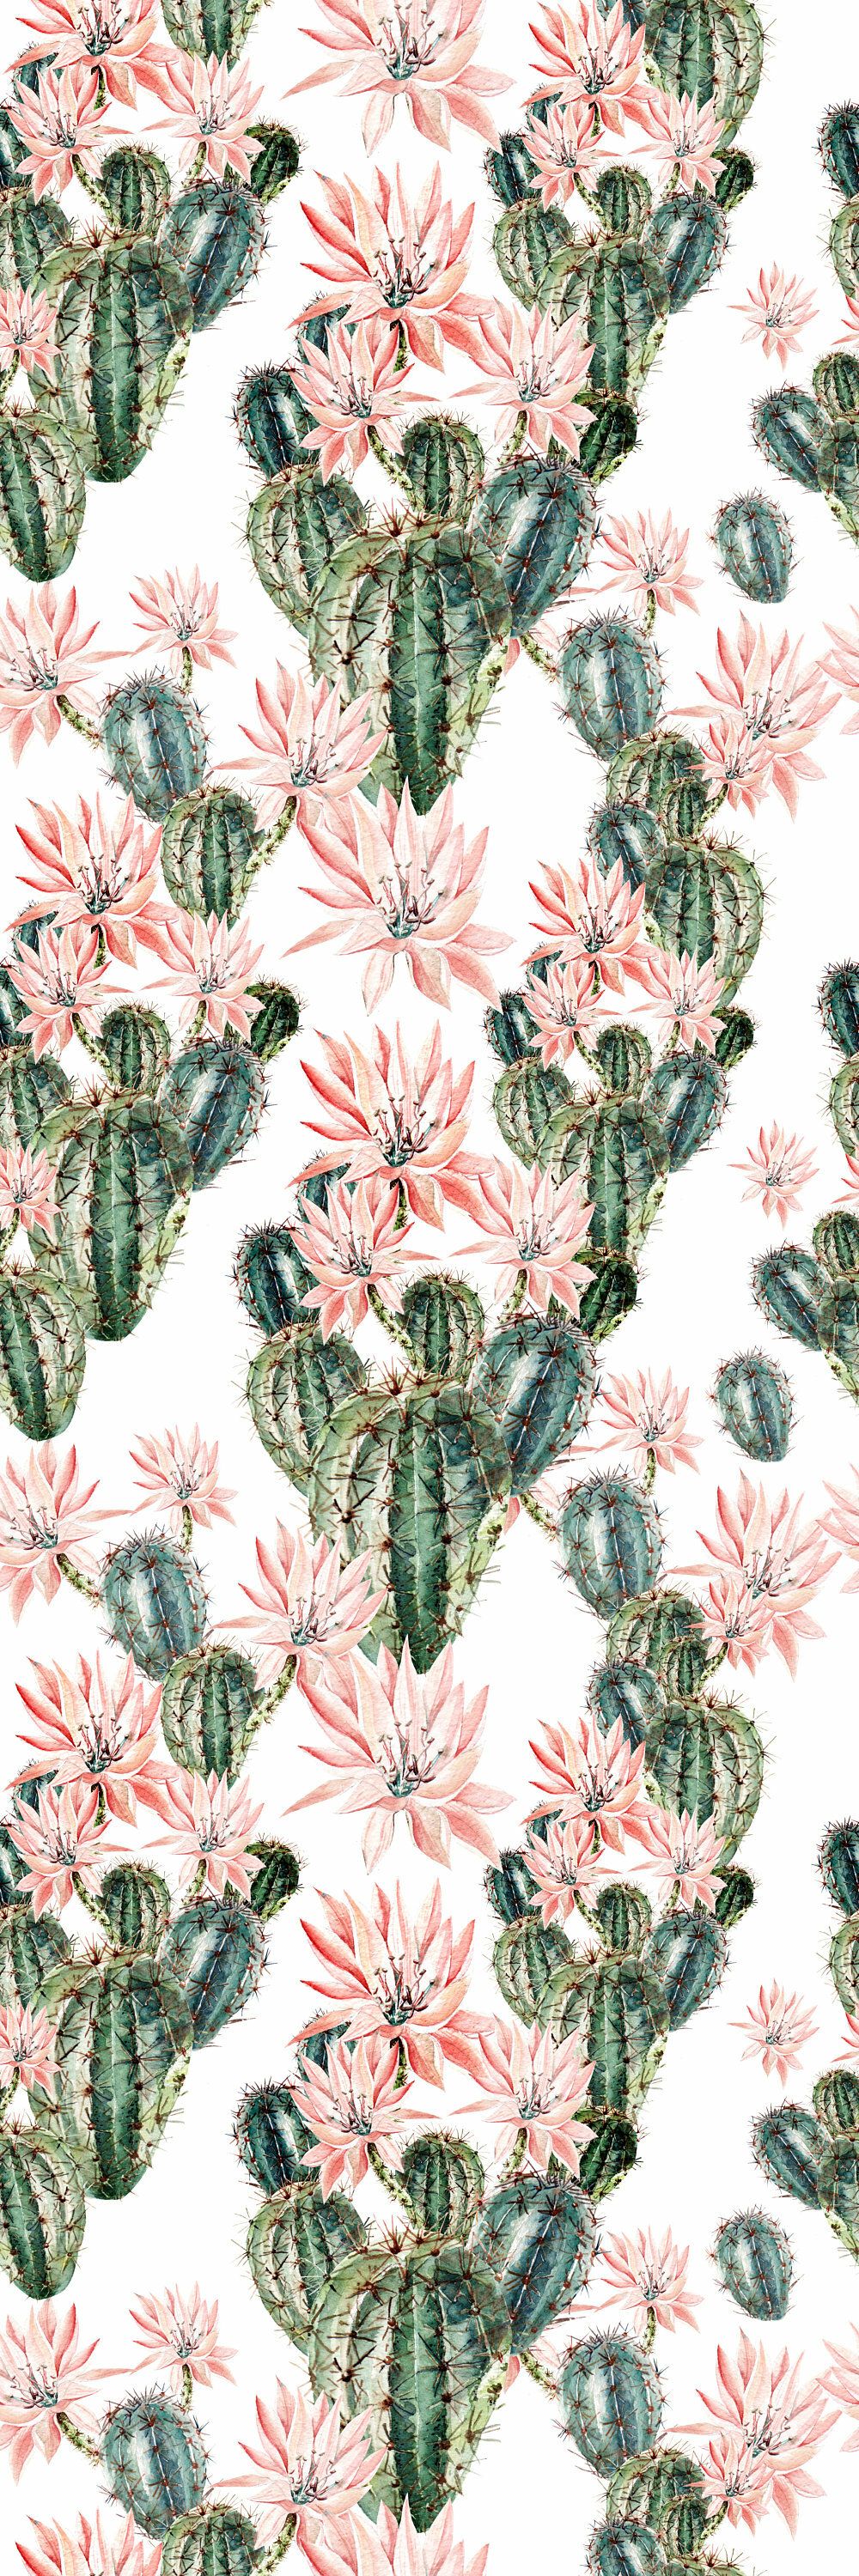 Union Rustic Demopolis Removable Watercolor Cactus Flowers 8.33' L x 25 W Peel and Stick Wallpaper Roll